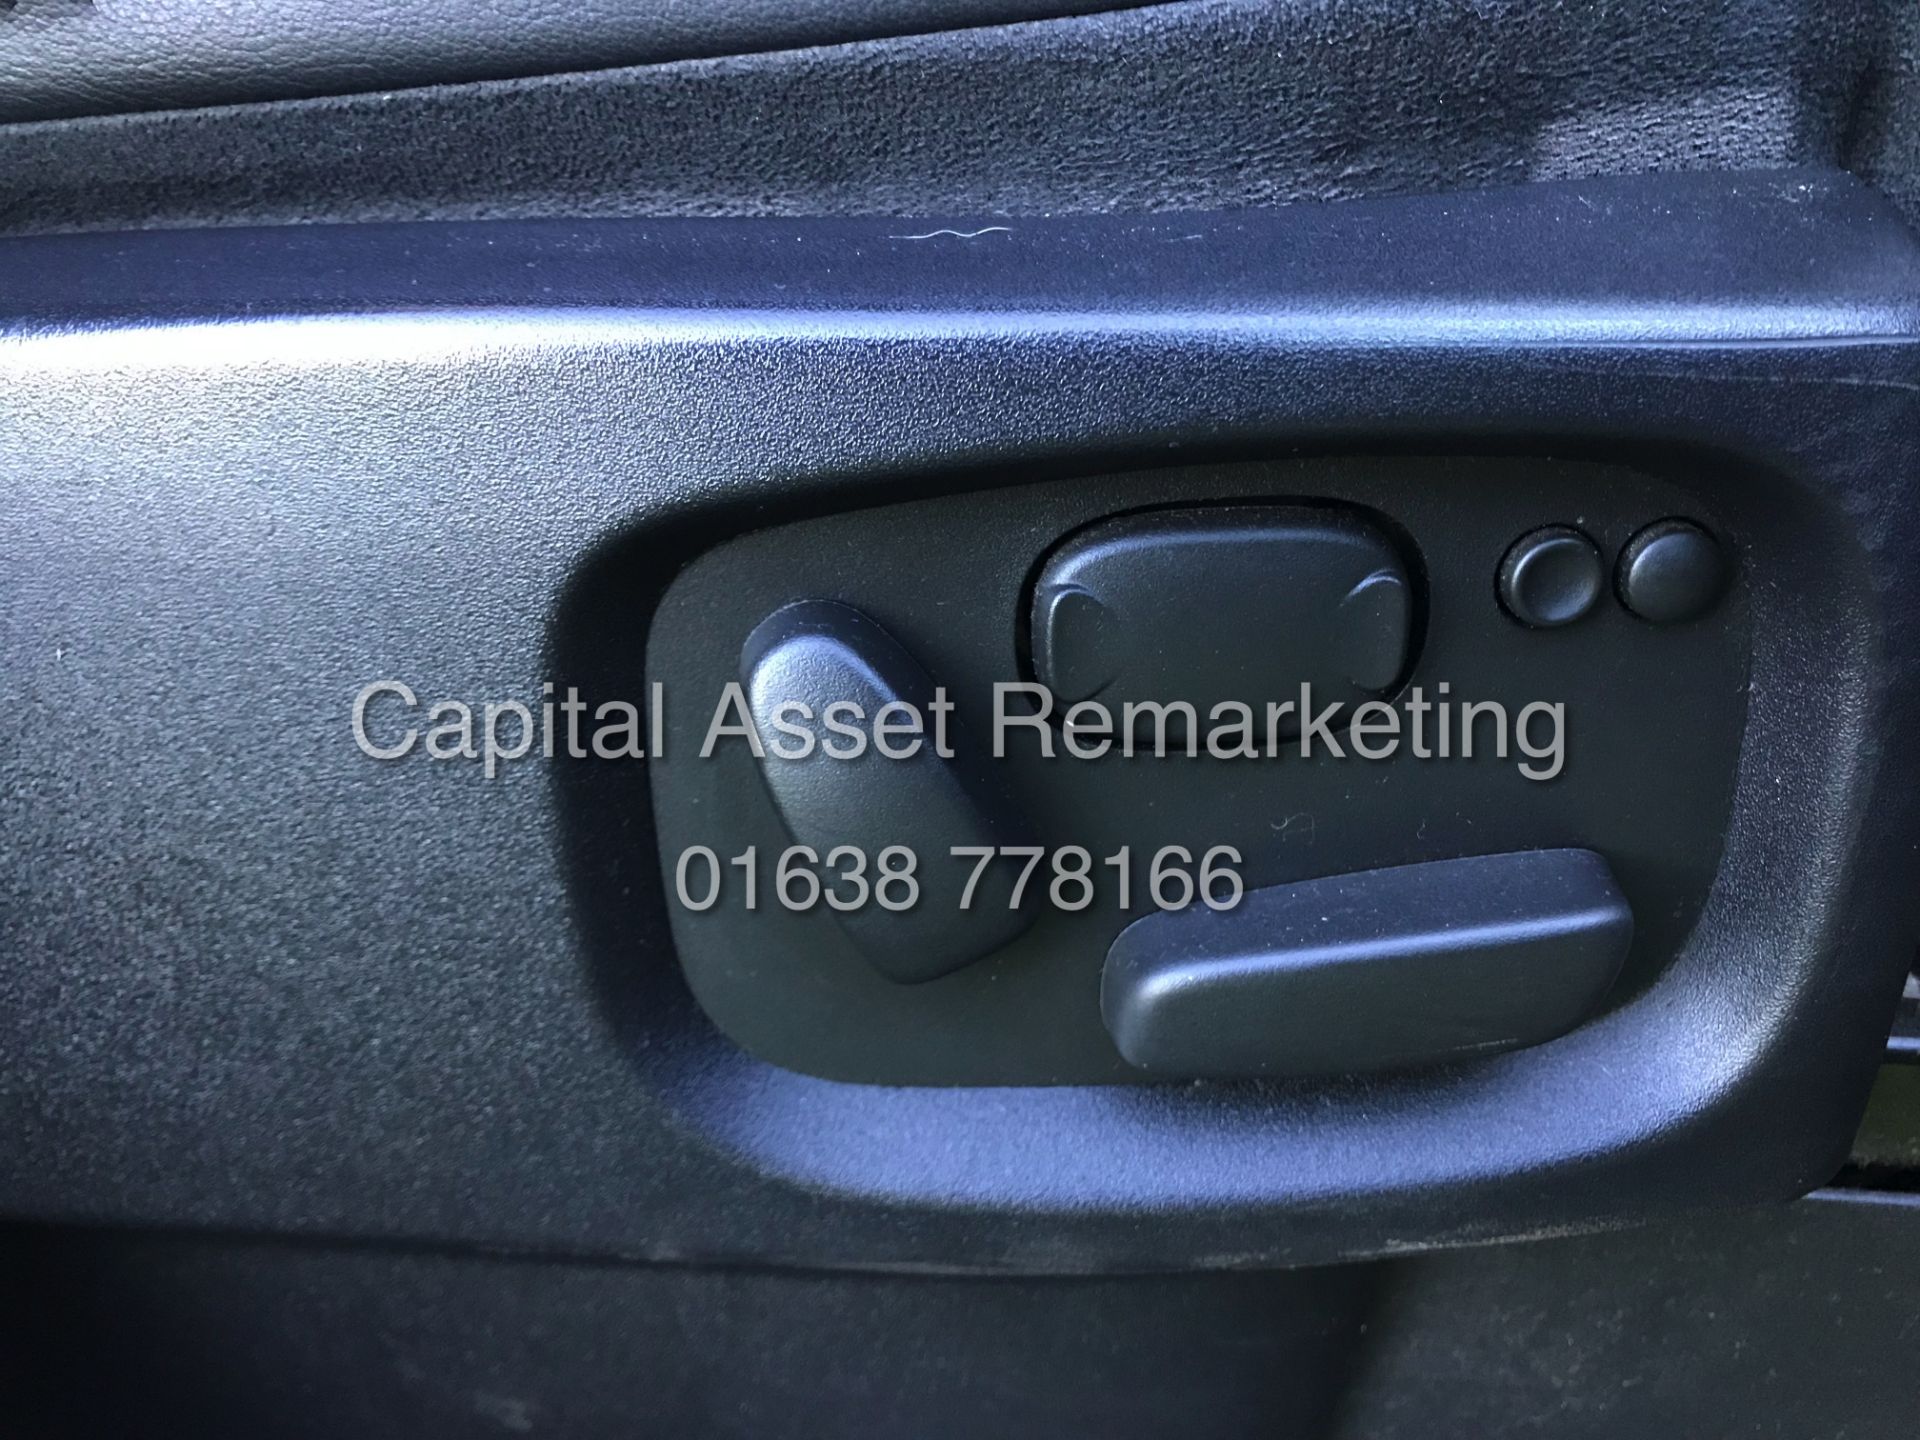 (ON SALE) LAND ROVER DISCOVERY 4 "HSE" 3.0 SDV6 AUTO (13 REG) 7 SEATER - TOP SPEC - SAT NAV -LEATHER - Image 25 of 31